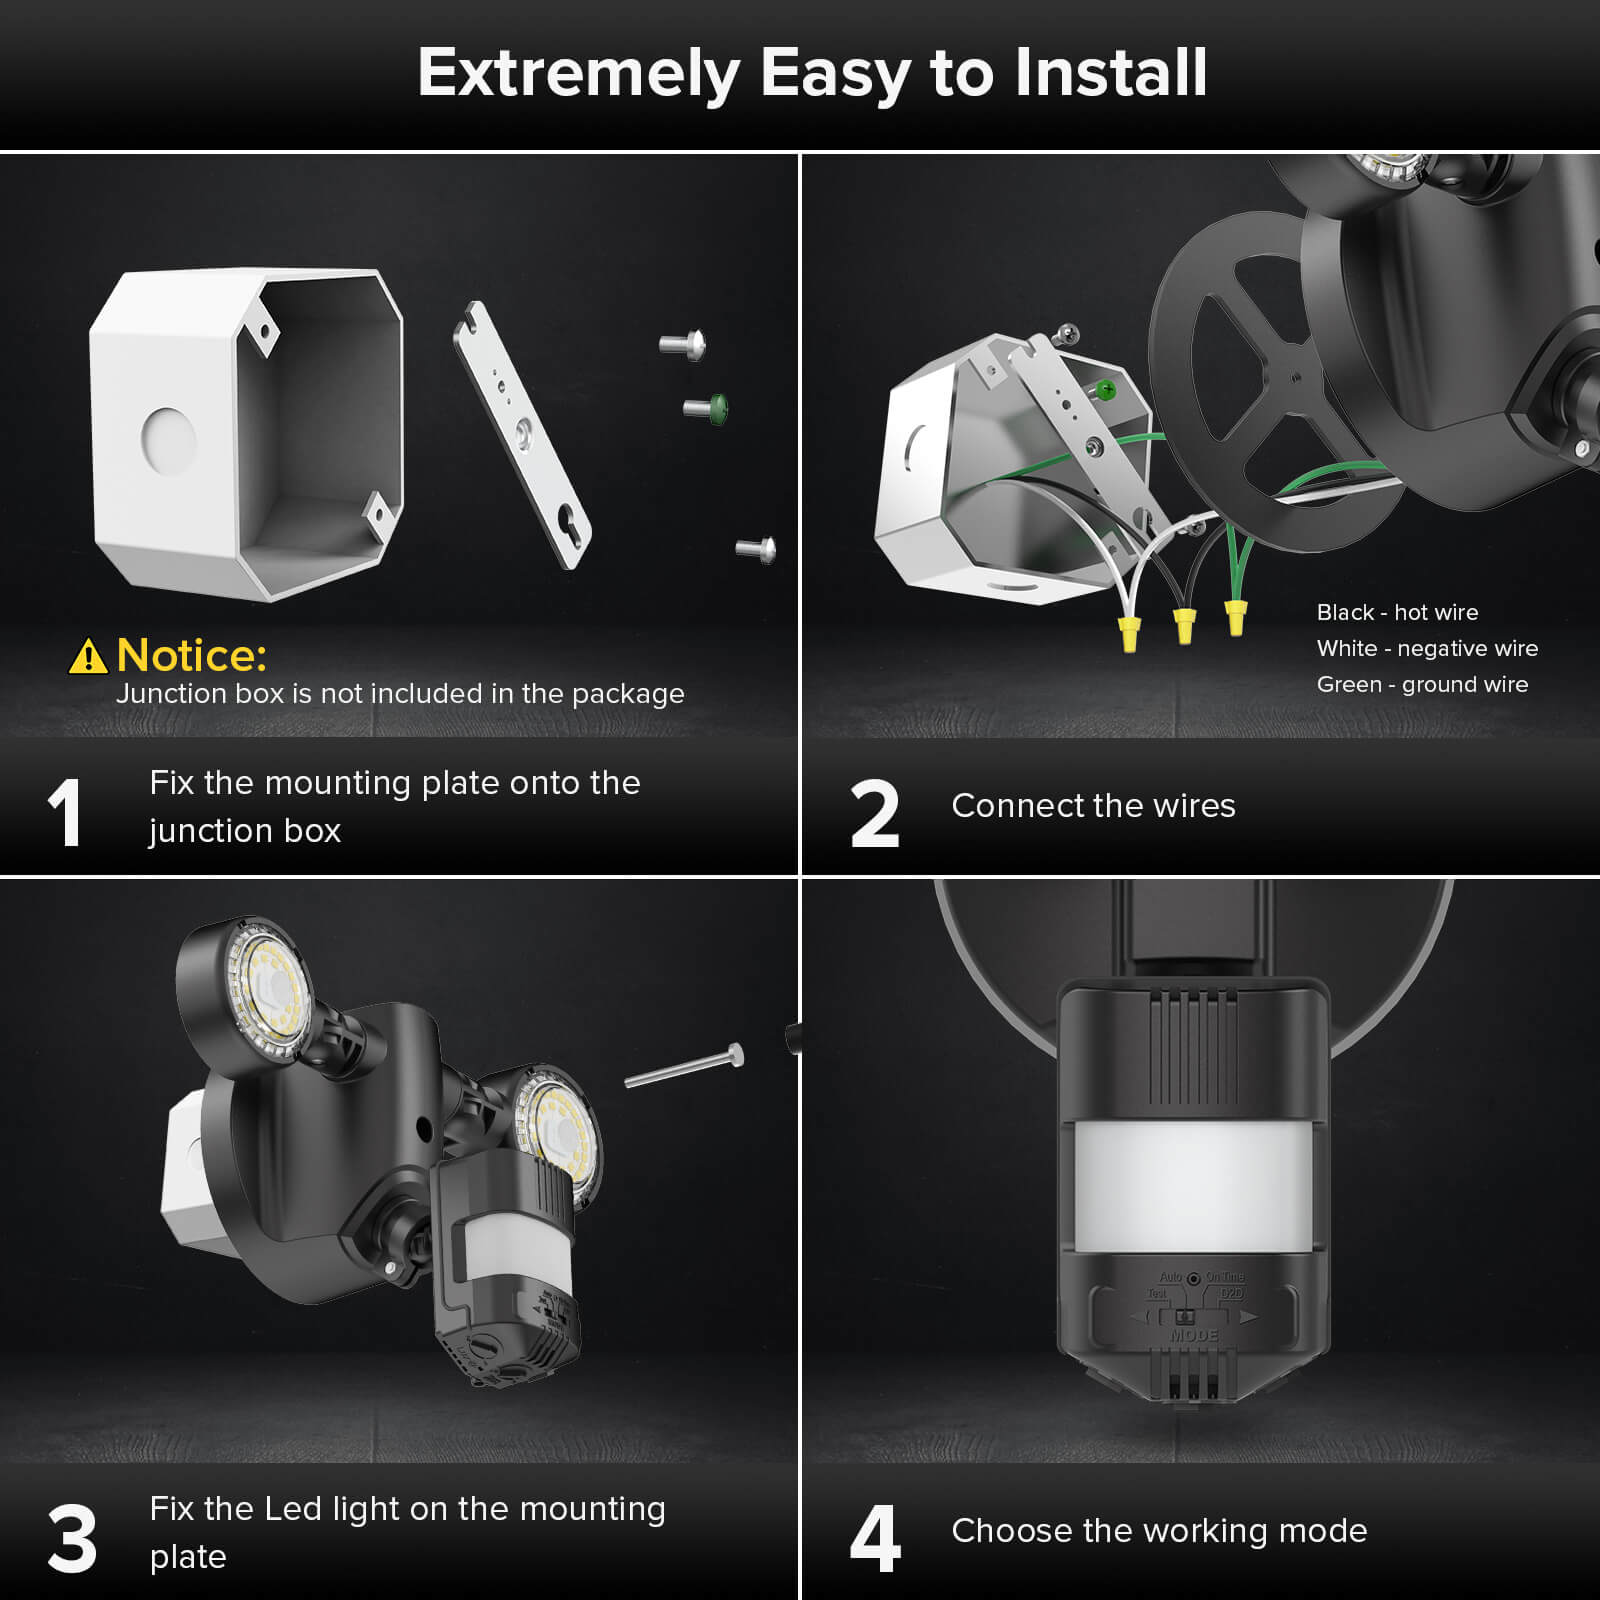 25W LED Security Light (Dusk to Dawn & Motion Sensor) is extremely easy to install